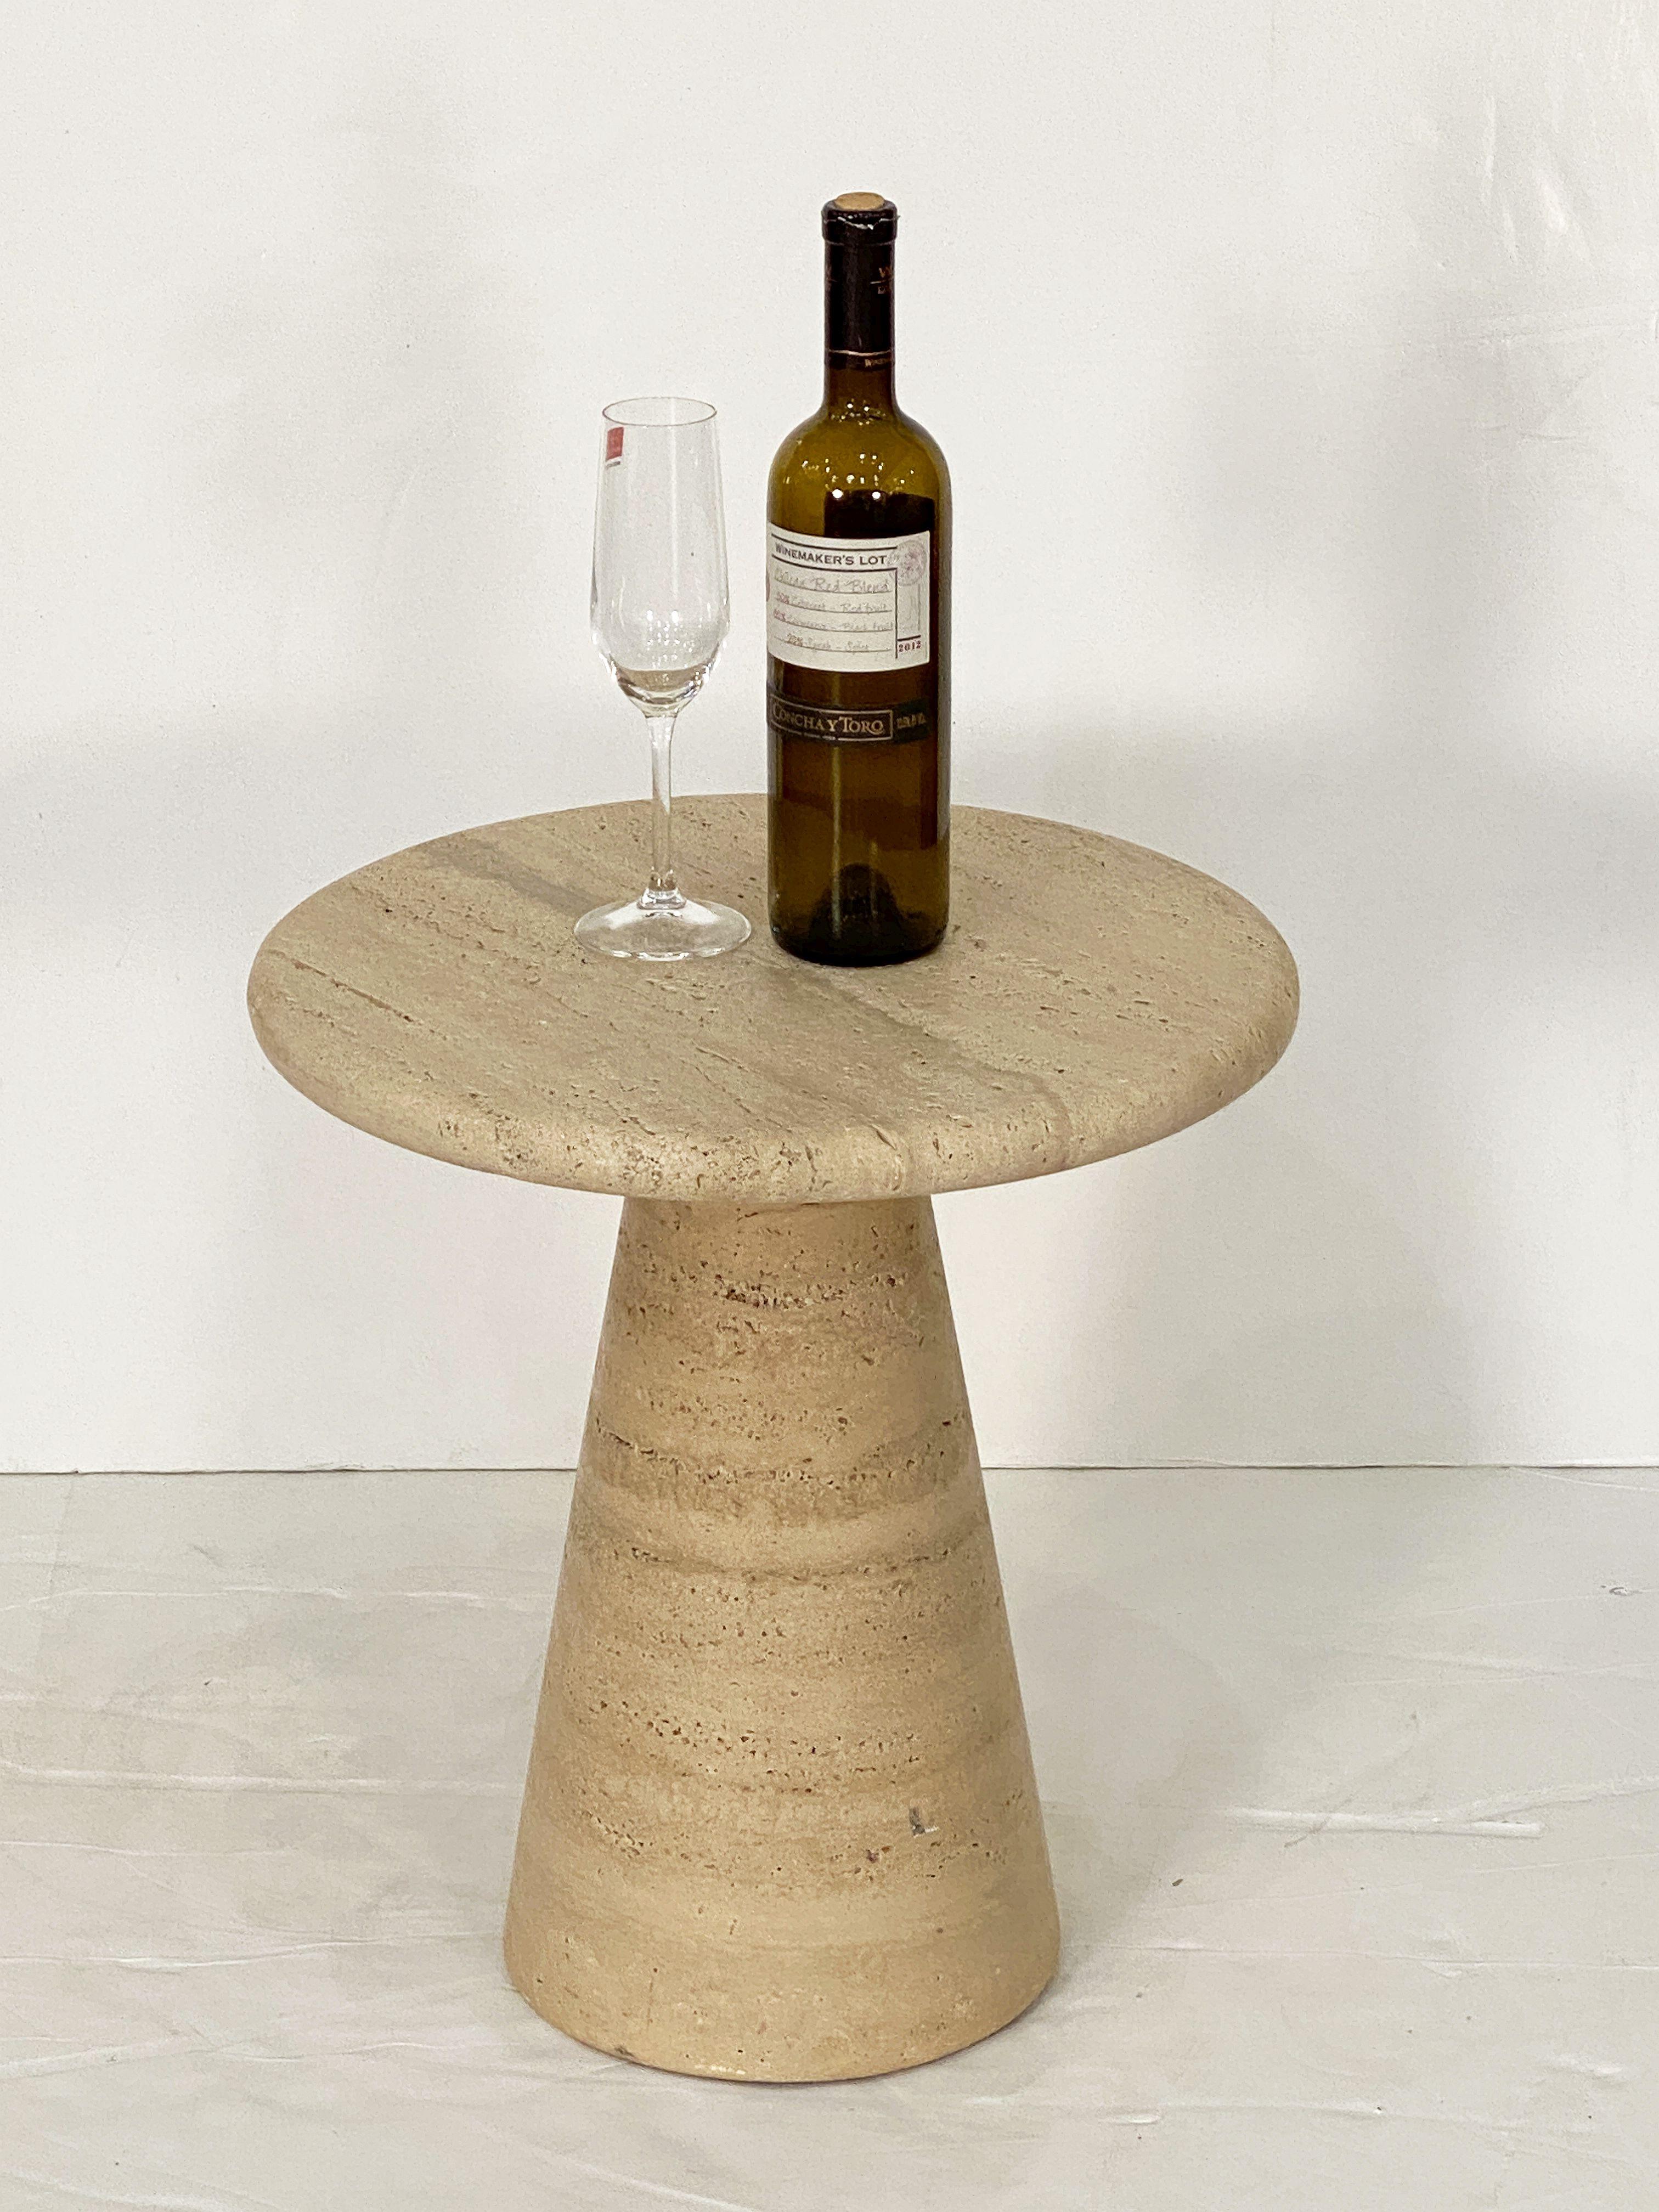 Italian Modernist Conical Table of Travertine Stone from Italy (Four Available) For Sale